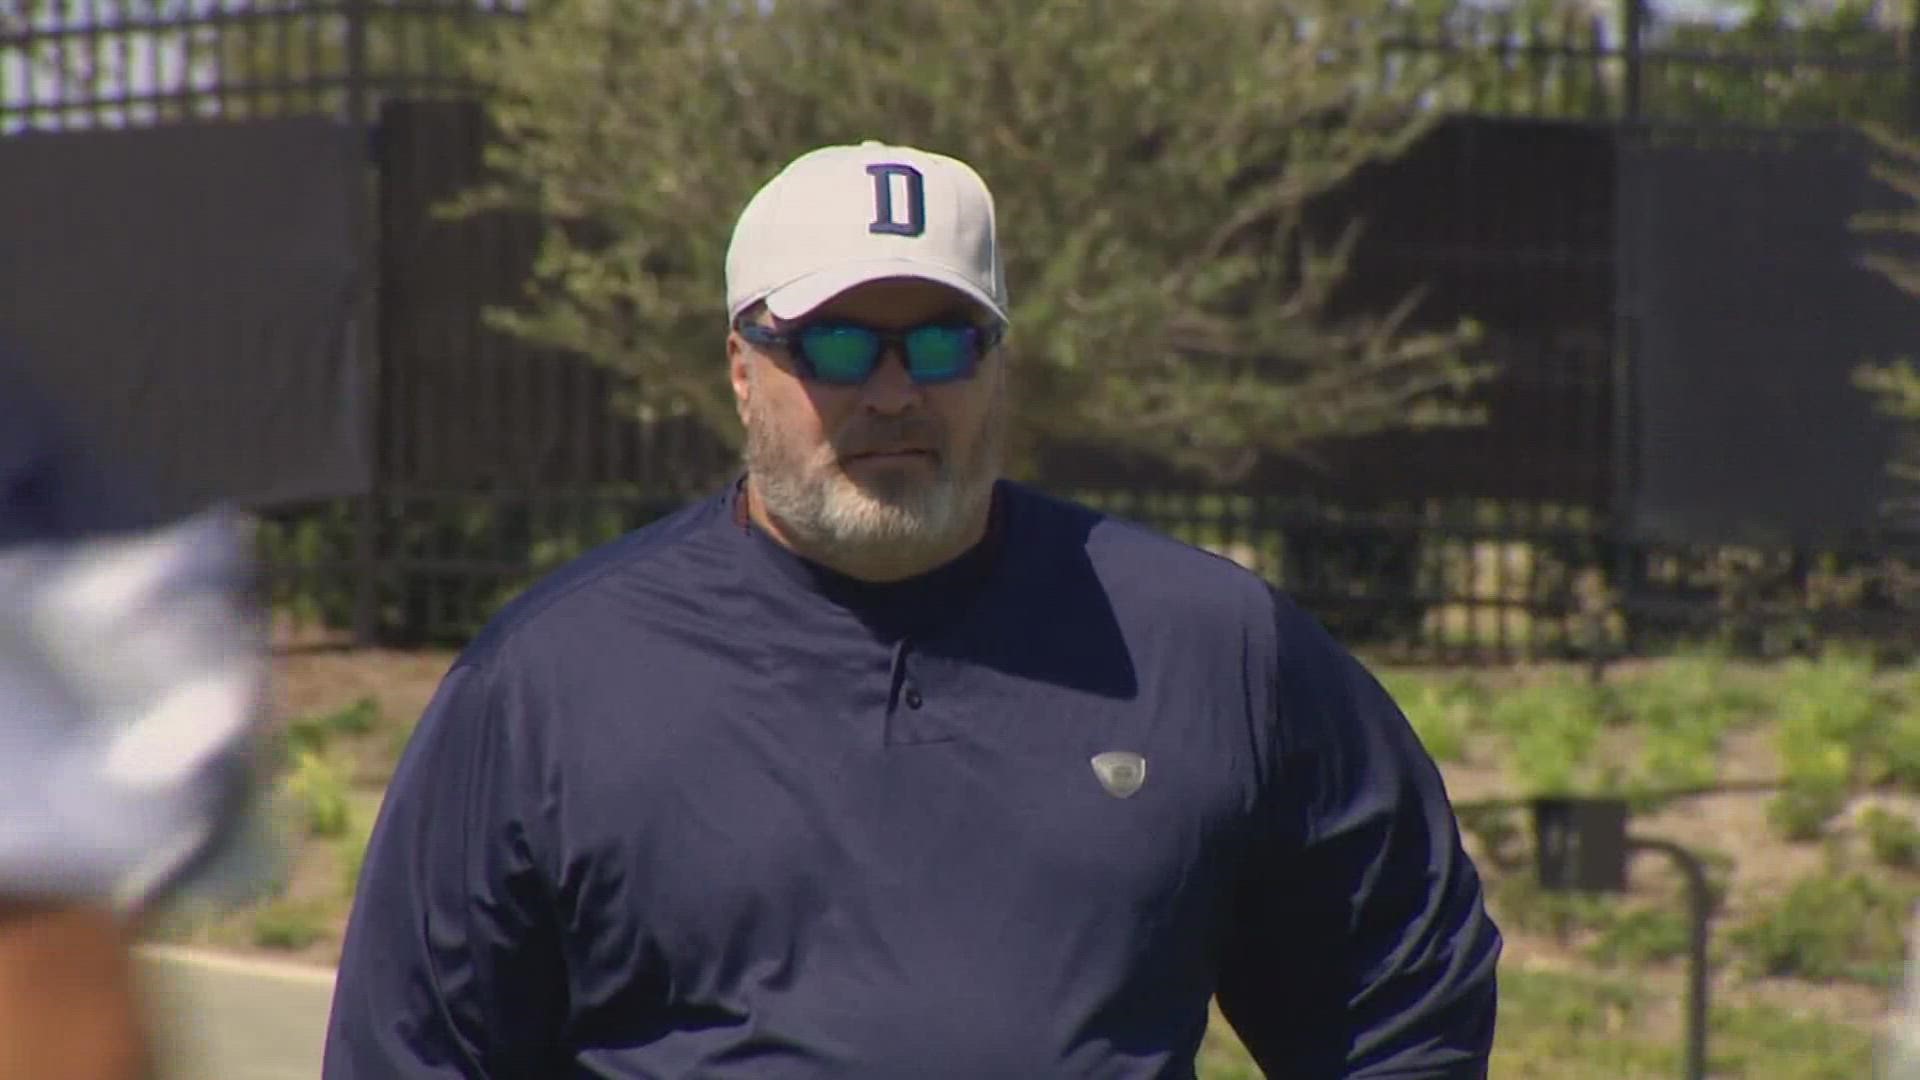 Cowboys head coach Mike McCarthy tested positive for COVID-19 Monday. He is fully vaccinated and so is the entire Cowboys coaching staff.